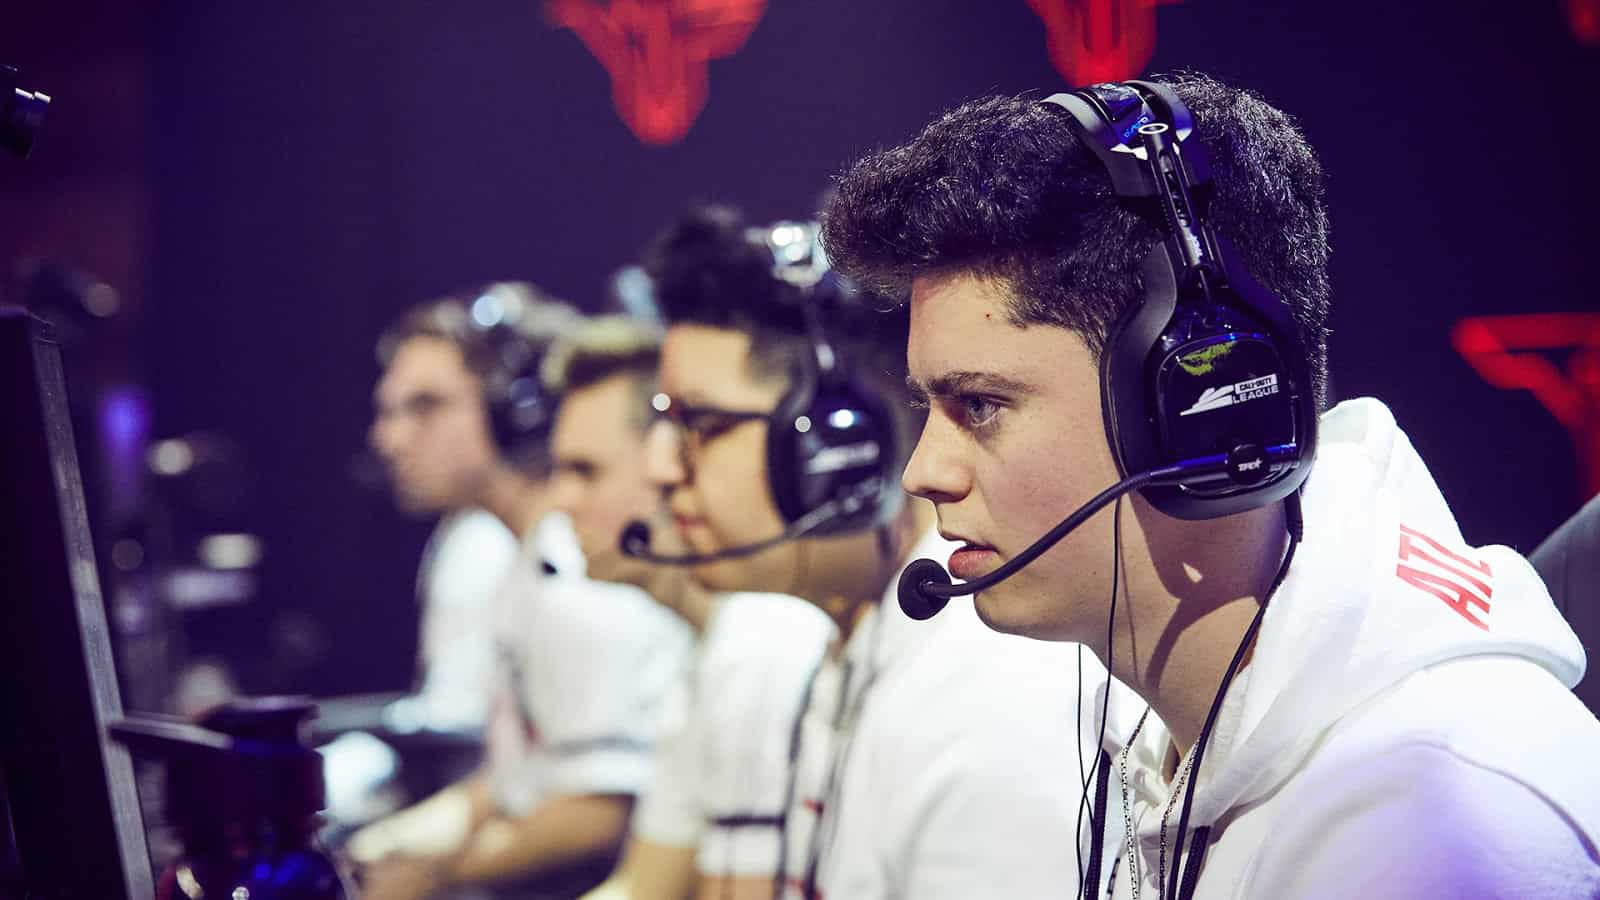 “We had to get back on top of our game” – An Interview With Atlanta FaZe’s Priestahh